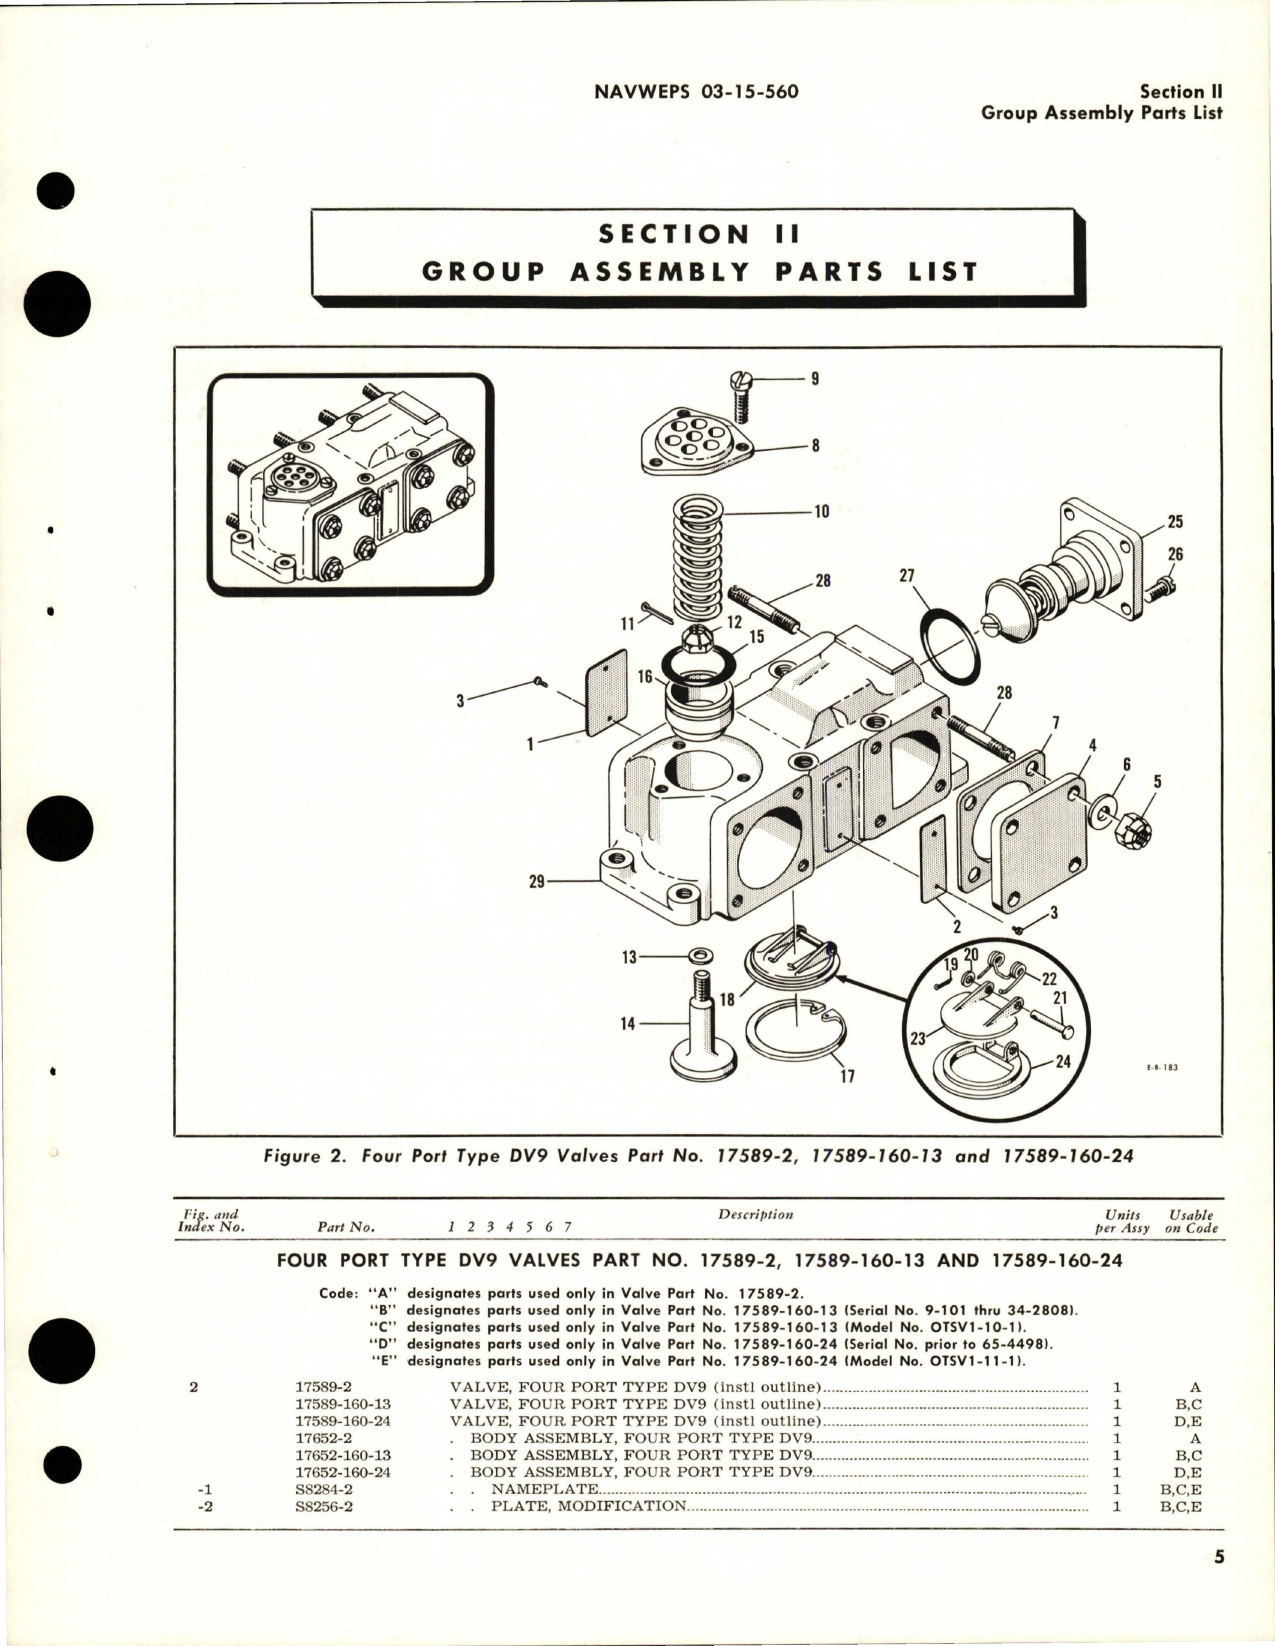 Sample page 9 from AirCorps Library document: Illustrated Parts Breakdown for Thermostatic Temperature Control Valves